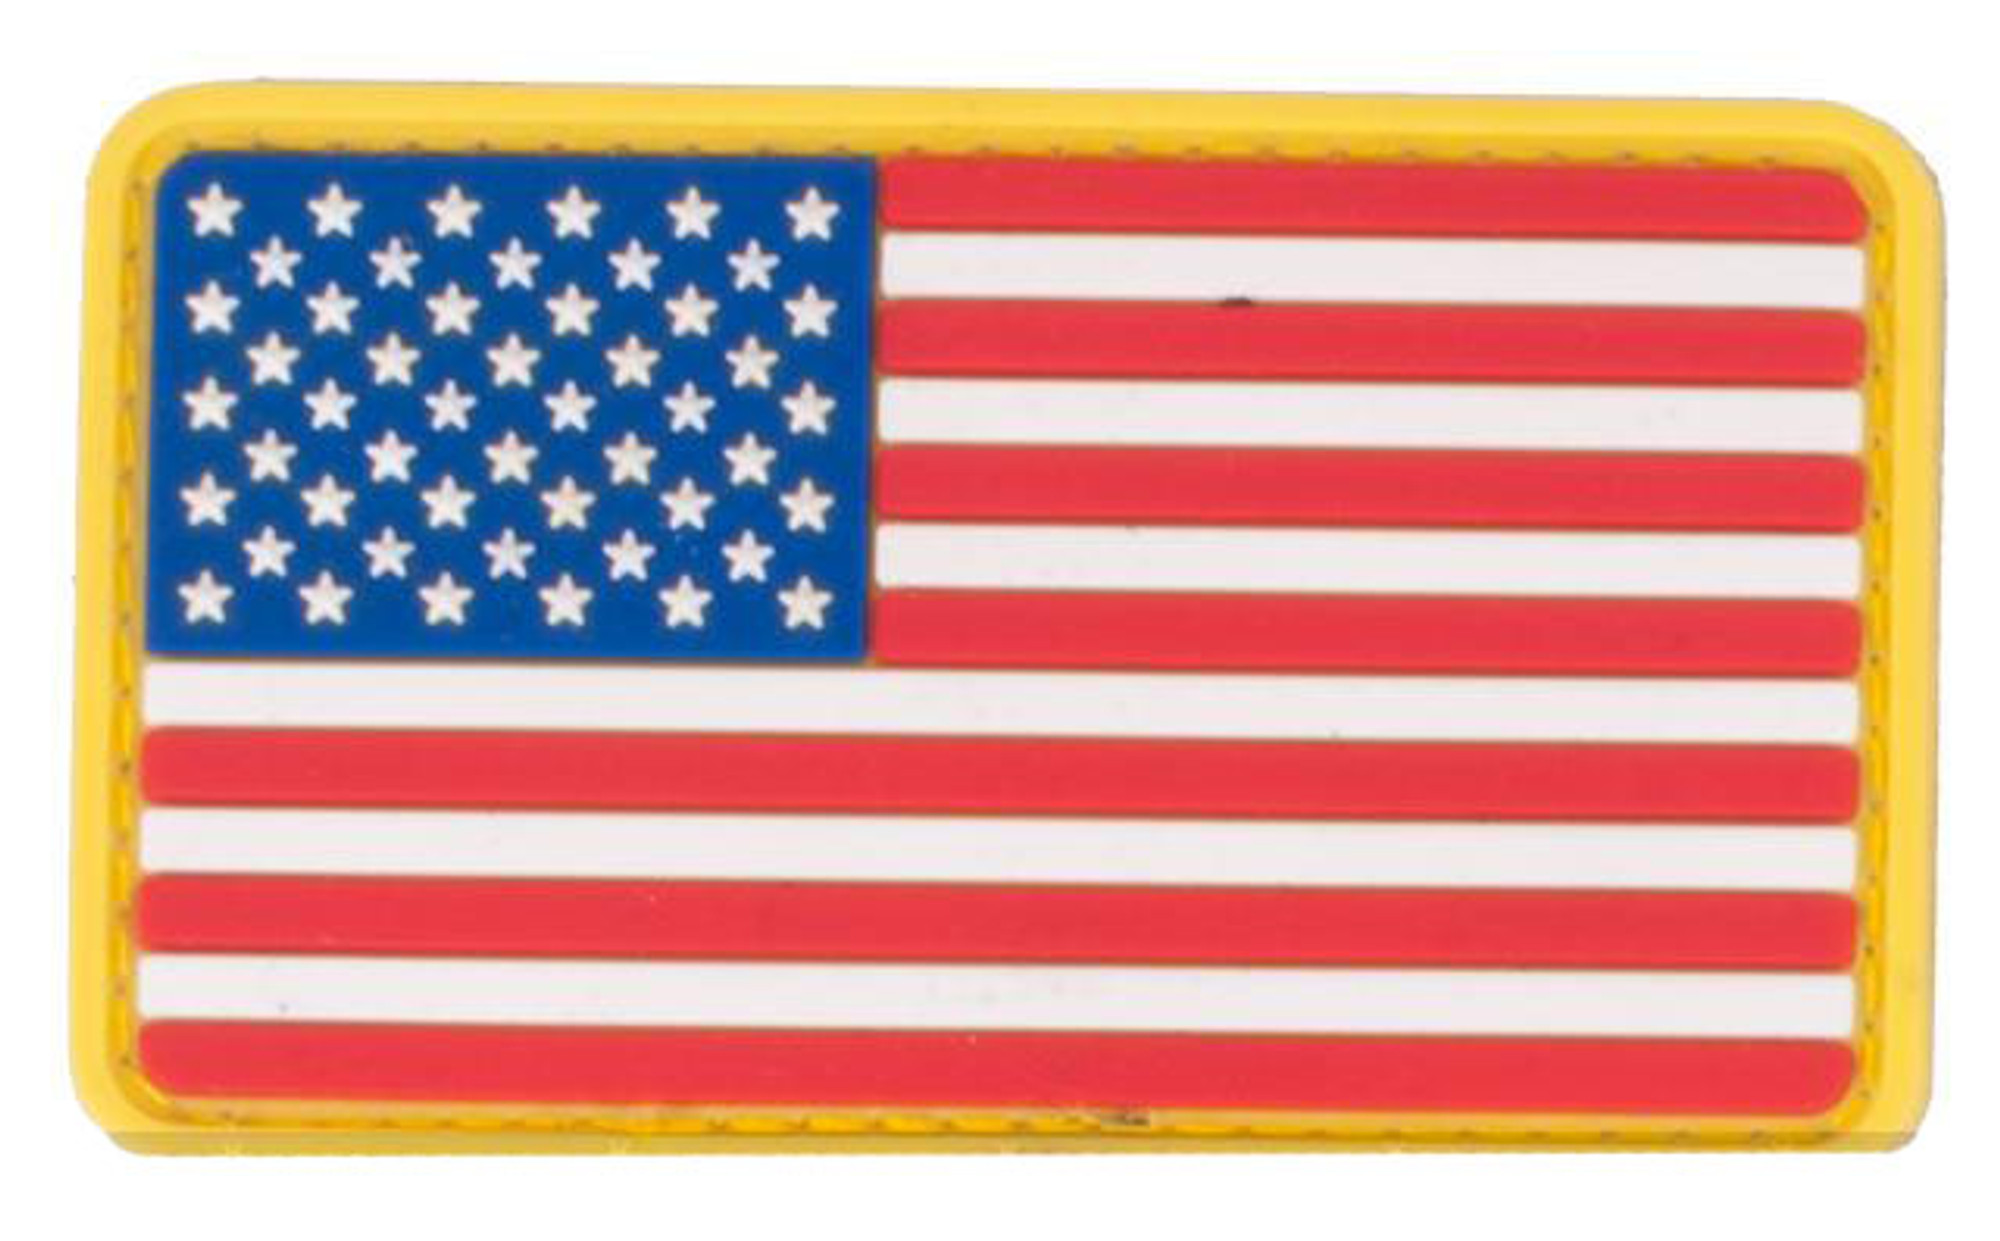 US Flag PVC Hook and Loop Rubber Patch (Color: Regular / Red White & Blue)